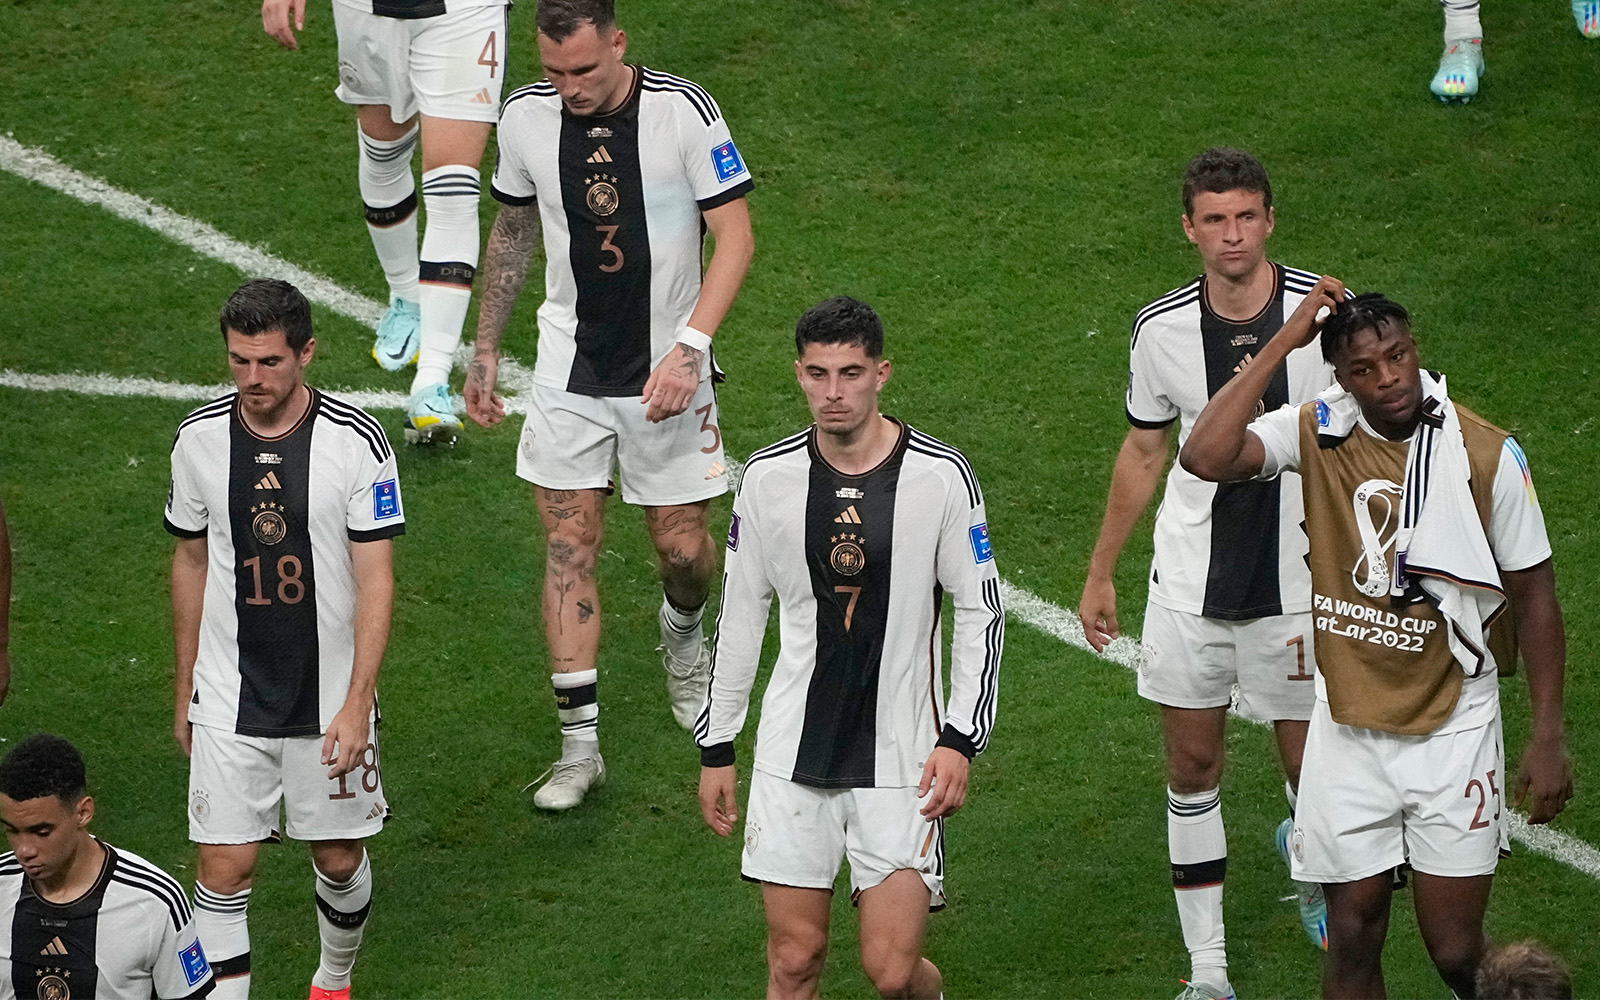 Germany knocked out of World Cup after Japan beats Spain in stunning upset | The Times of Israel